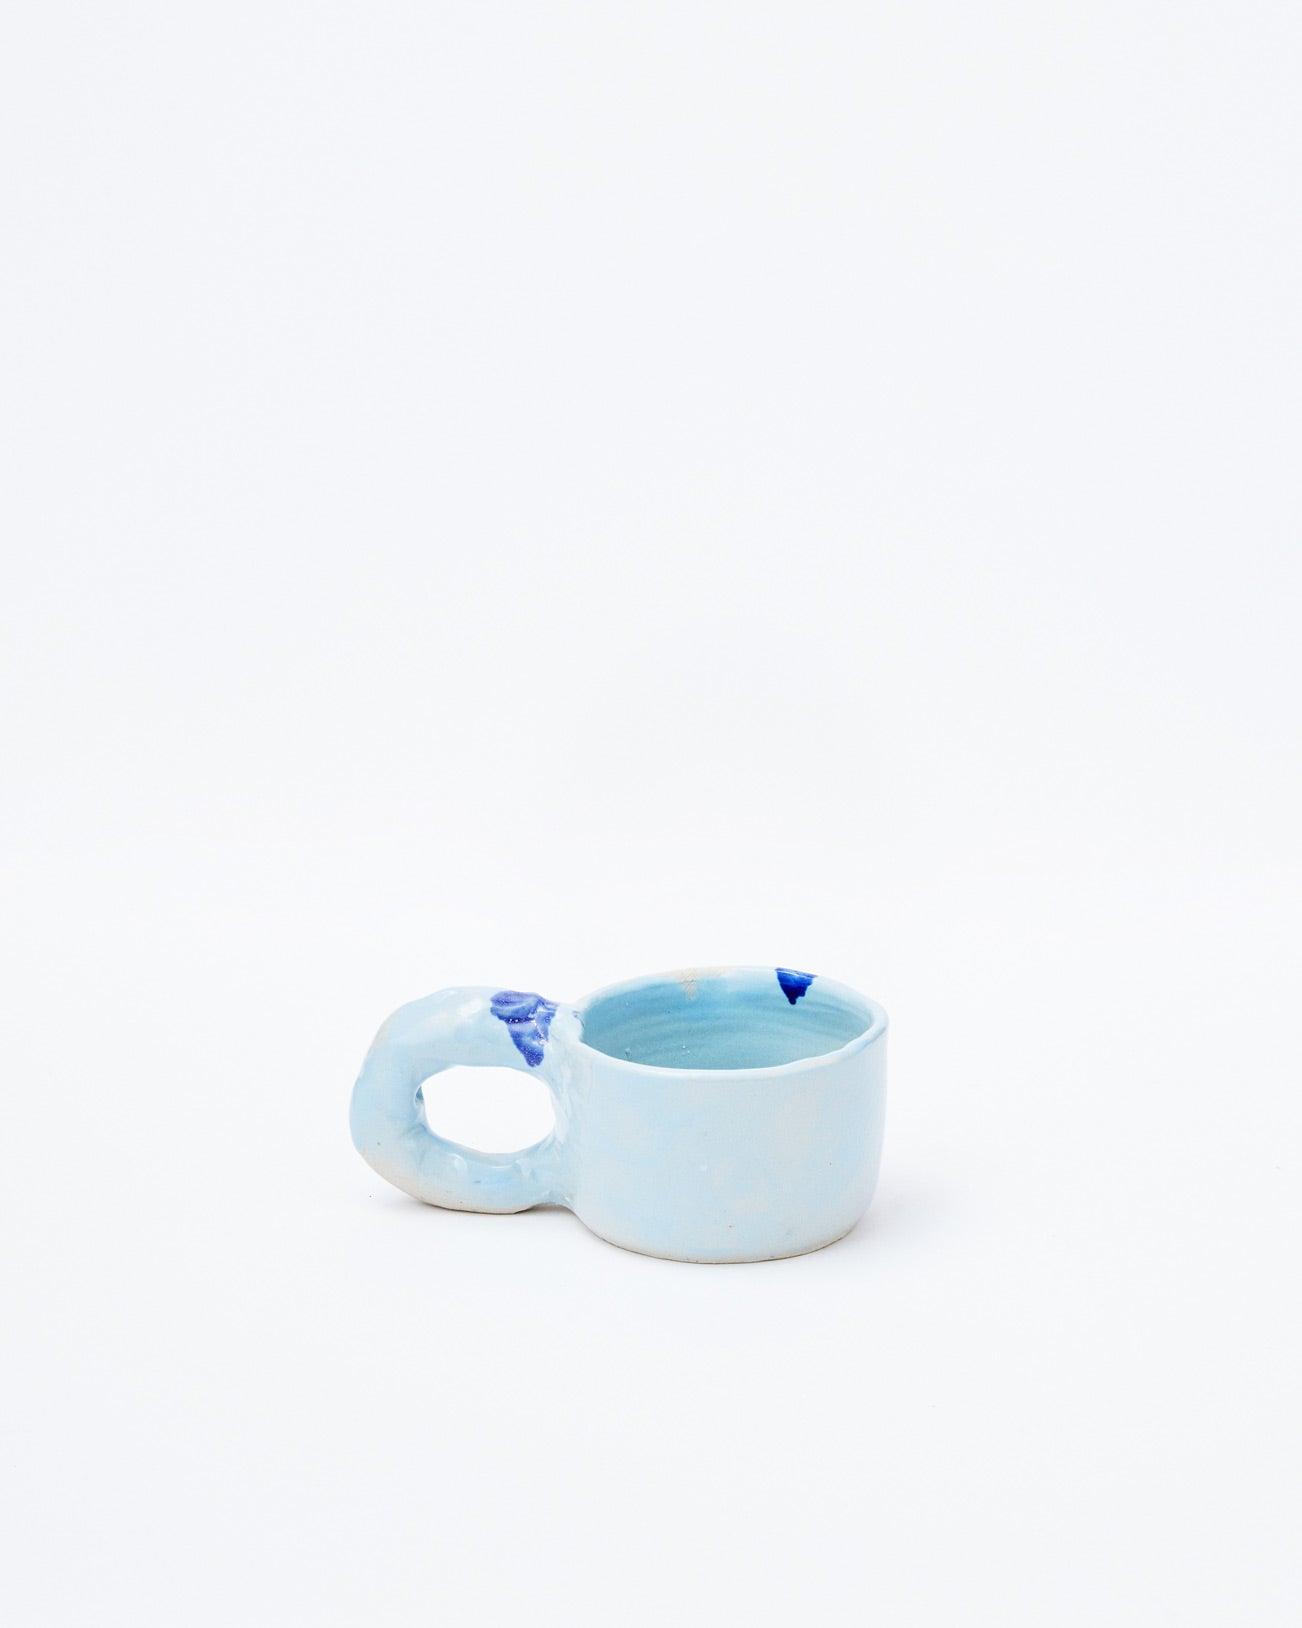 White background, light blue modern ceramic cup with handle in left position